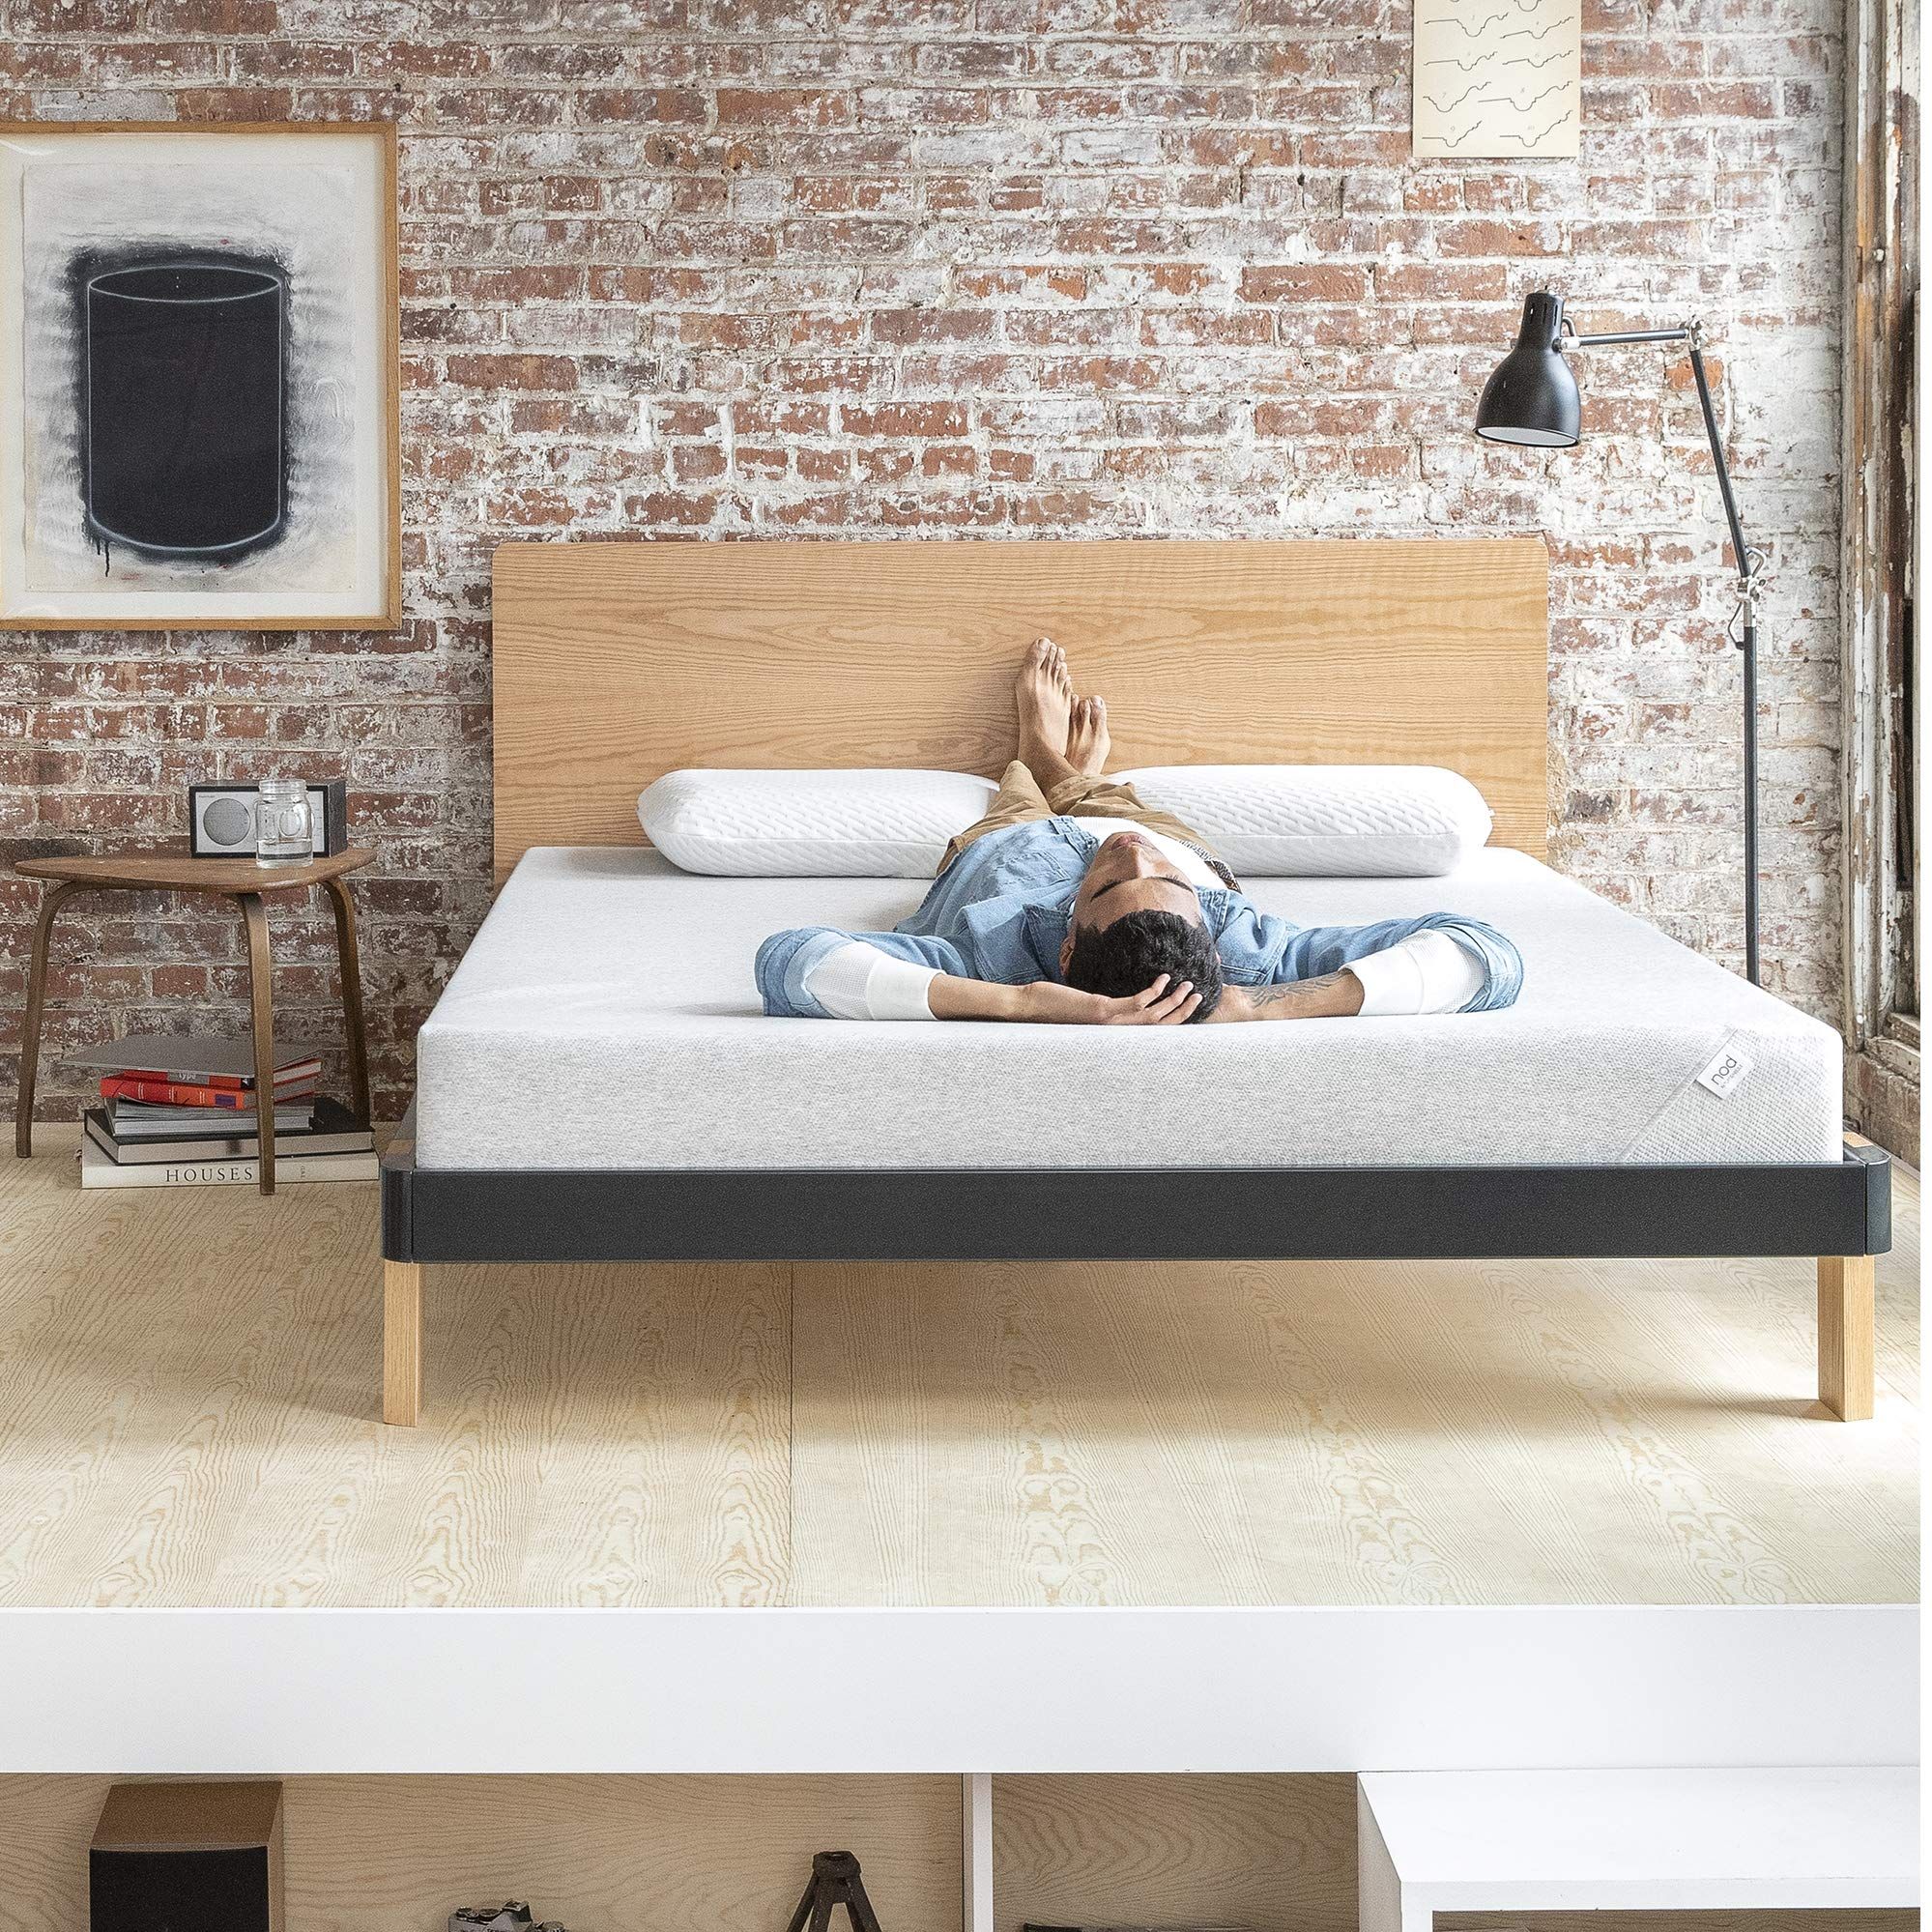 mattresses today are shorter than old bed frames